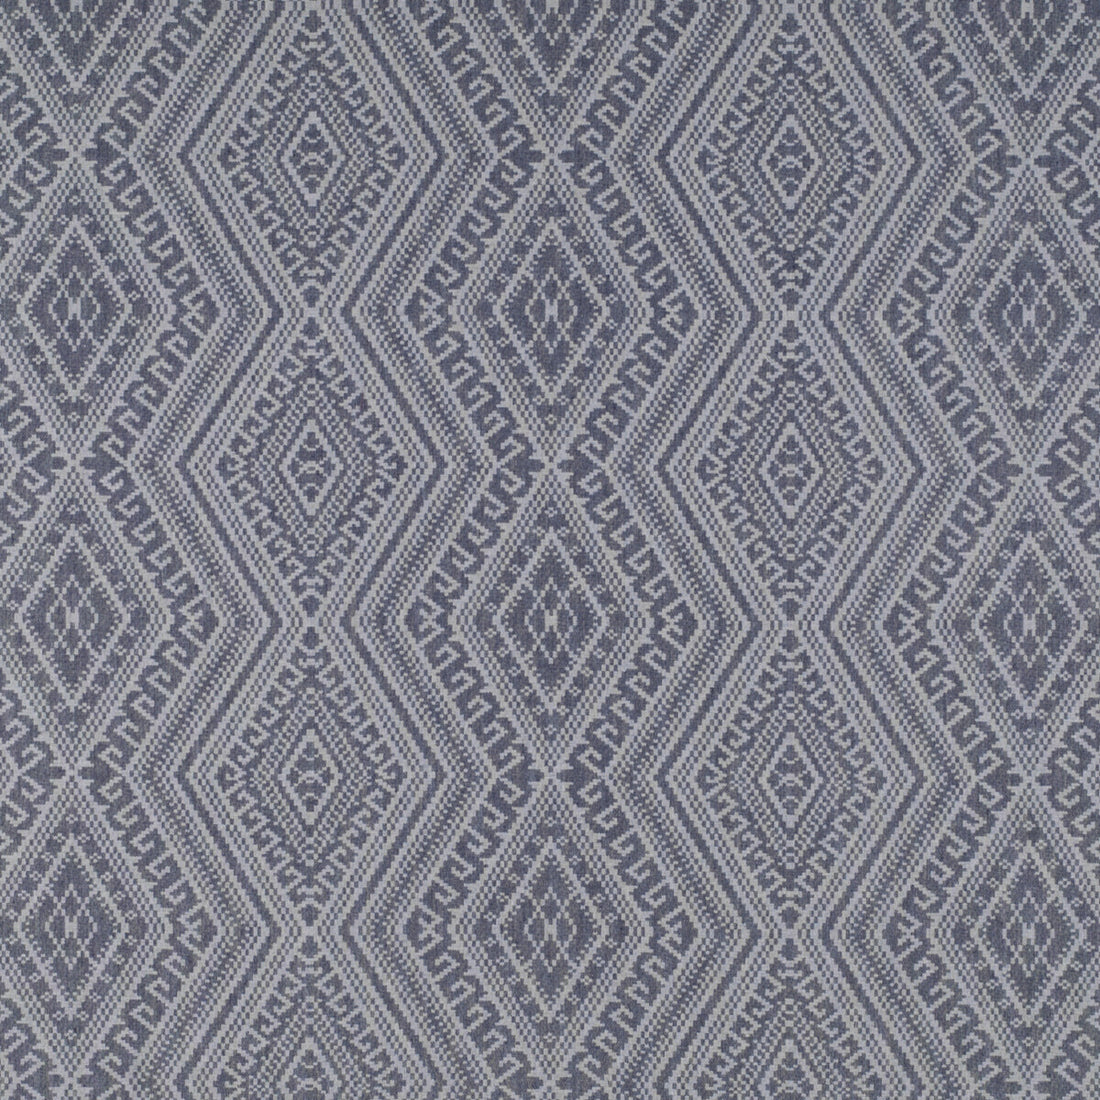 Estromboli fabric in navy color - pattern GDT5313.002.0 - by Gaston y Daniela in the Tierras collection